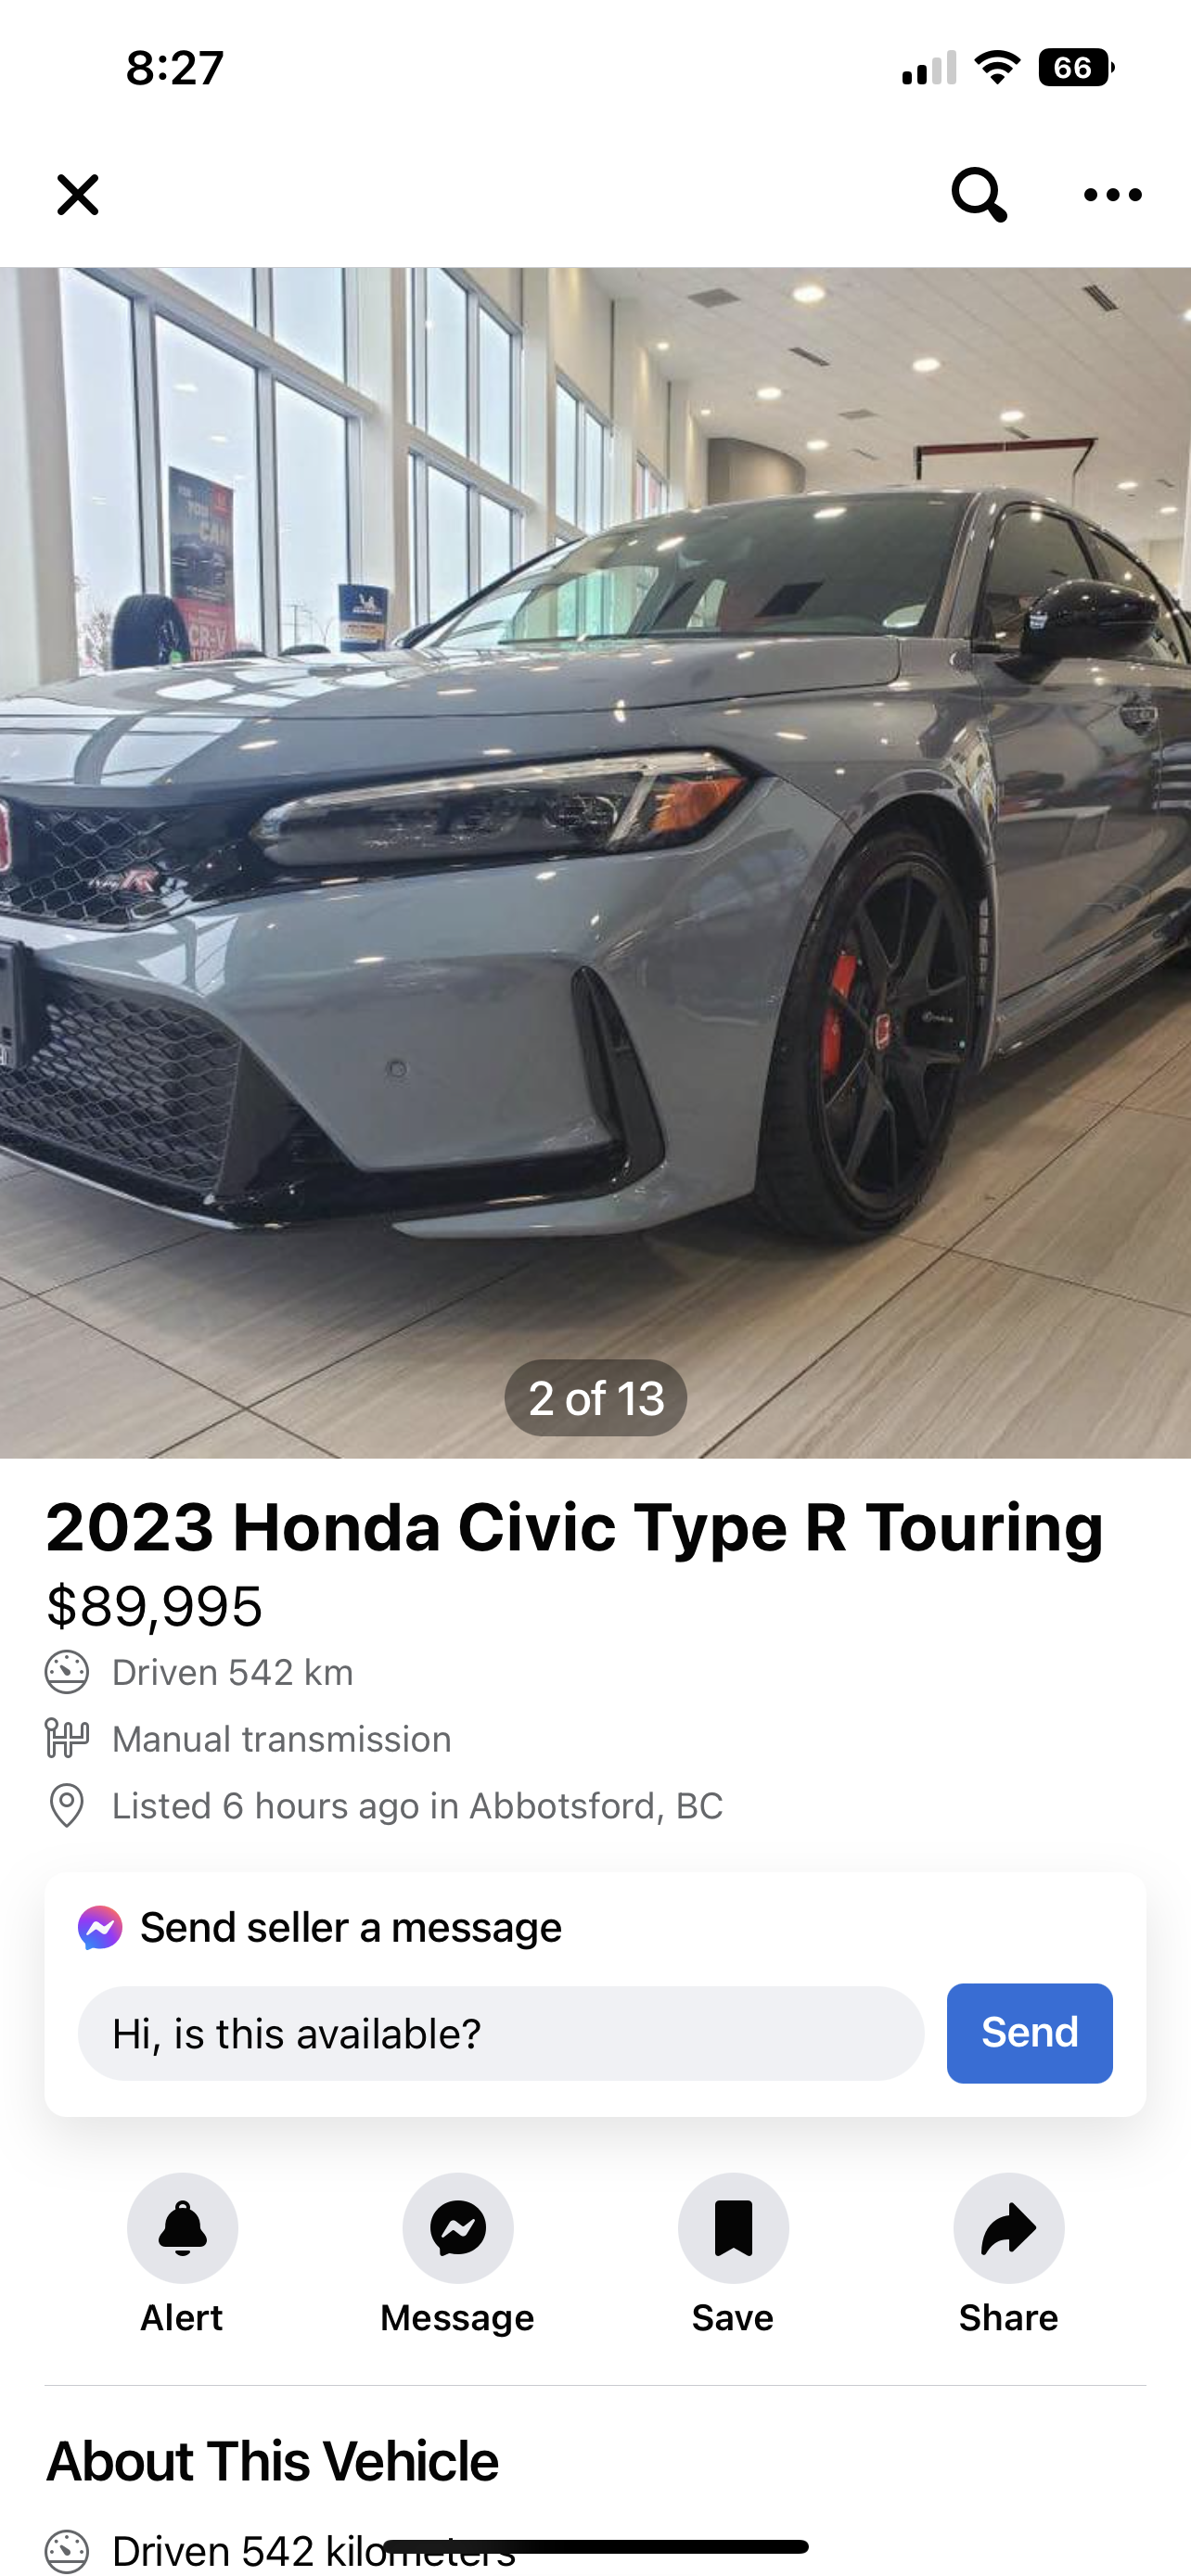 11th Gen Honda Civic 2023 Civic Type R Waitlist / Deposit / Reservations List - Check in here! 1BFF55C1-43EC-4ED6-A84F-C5D282DD28BF